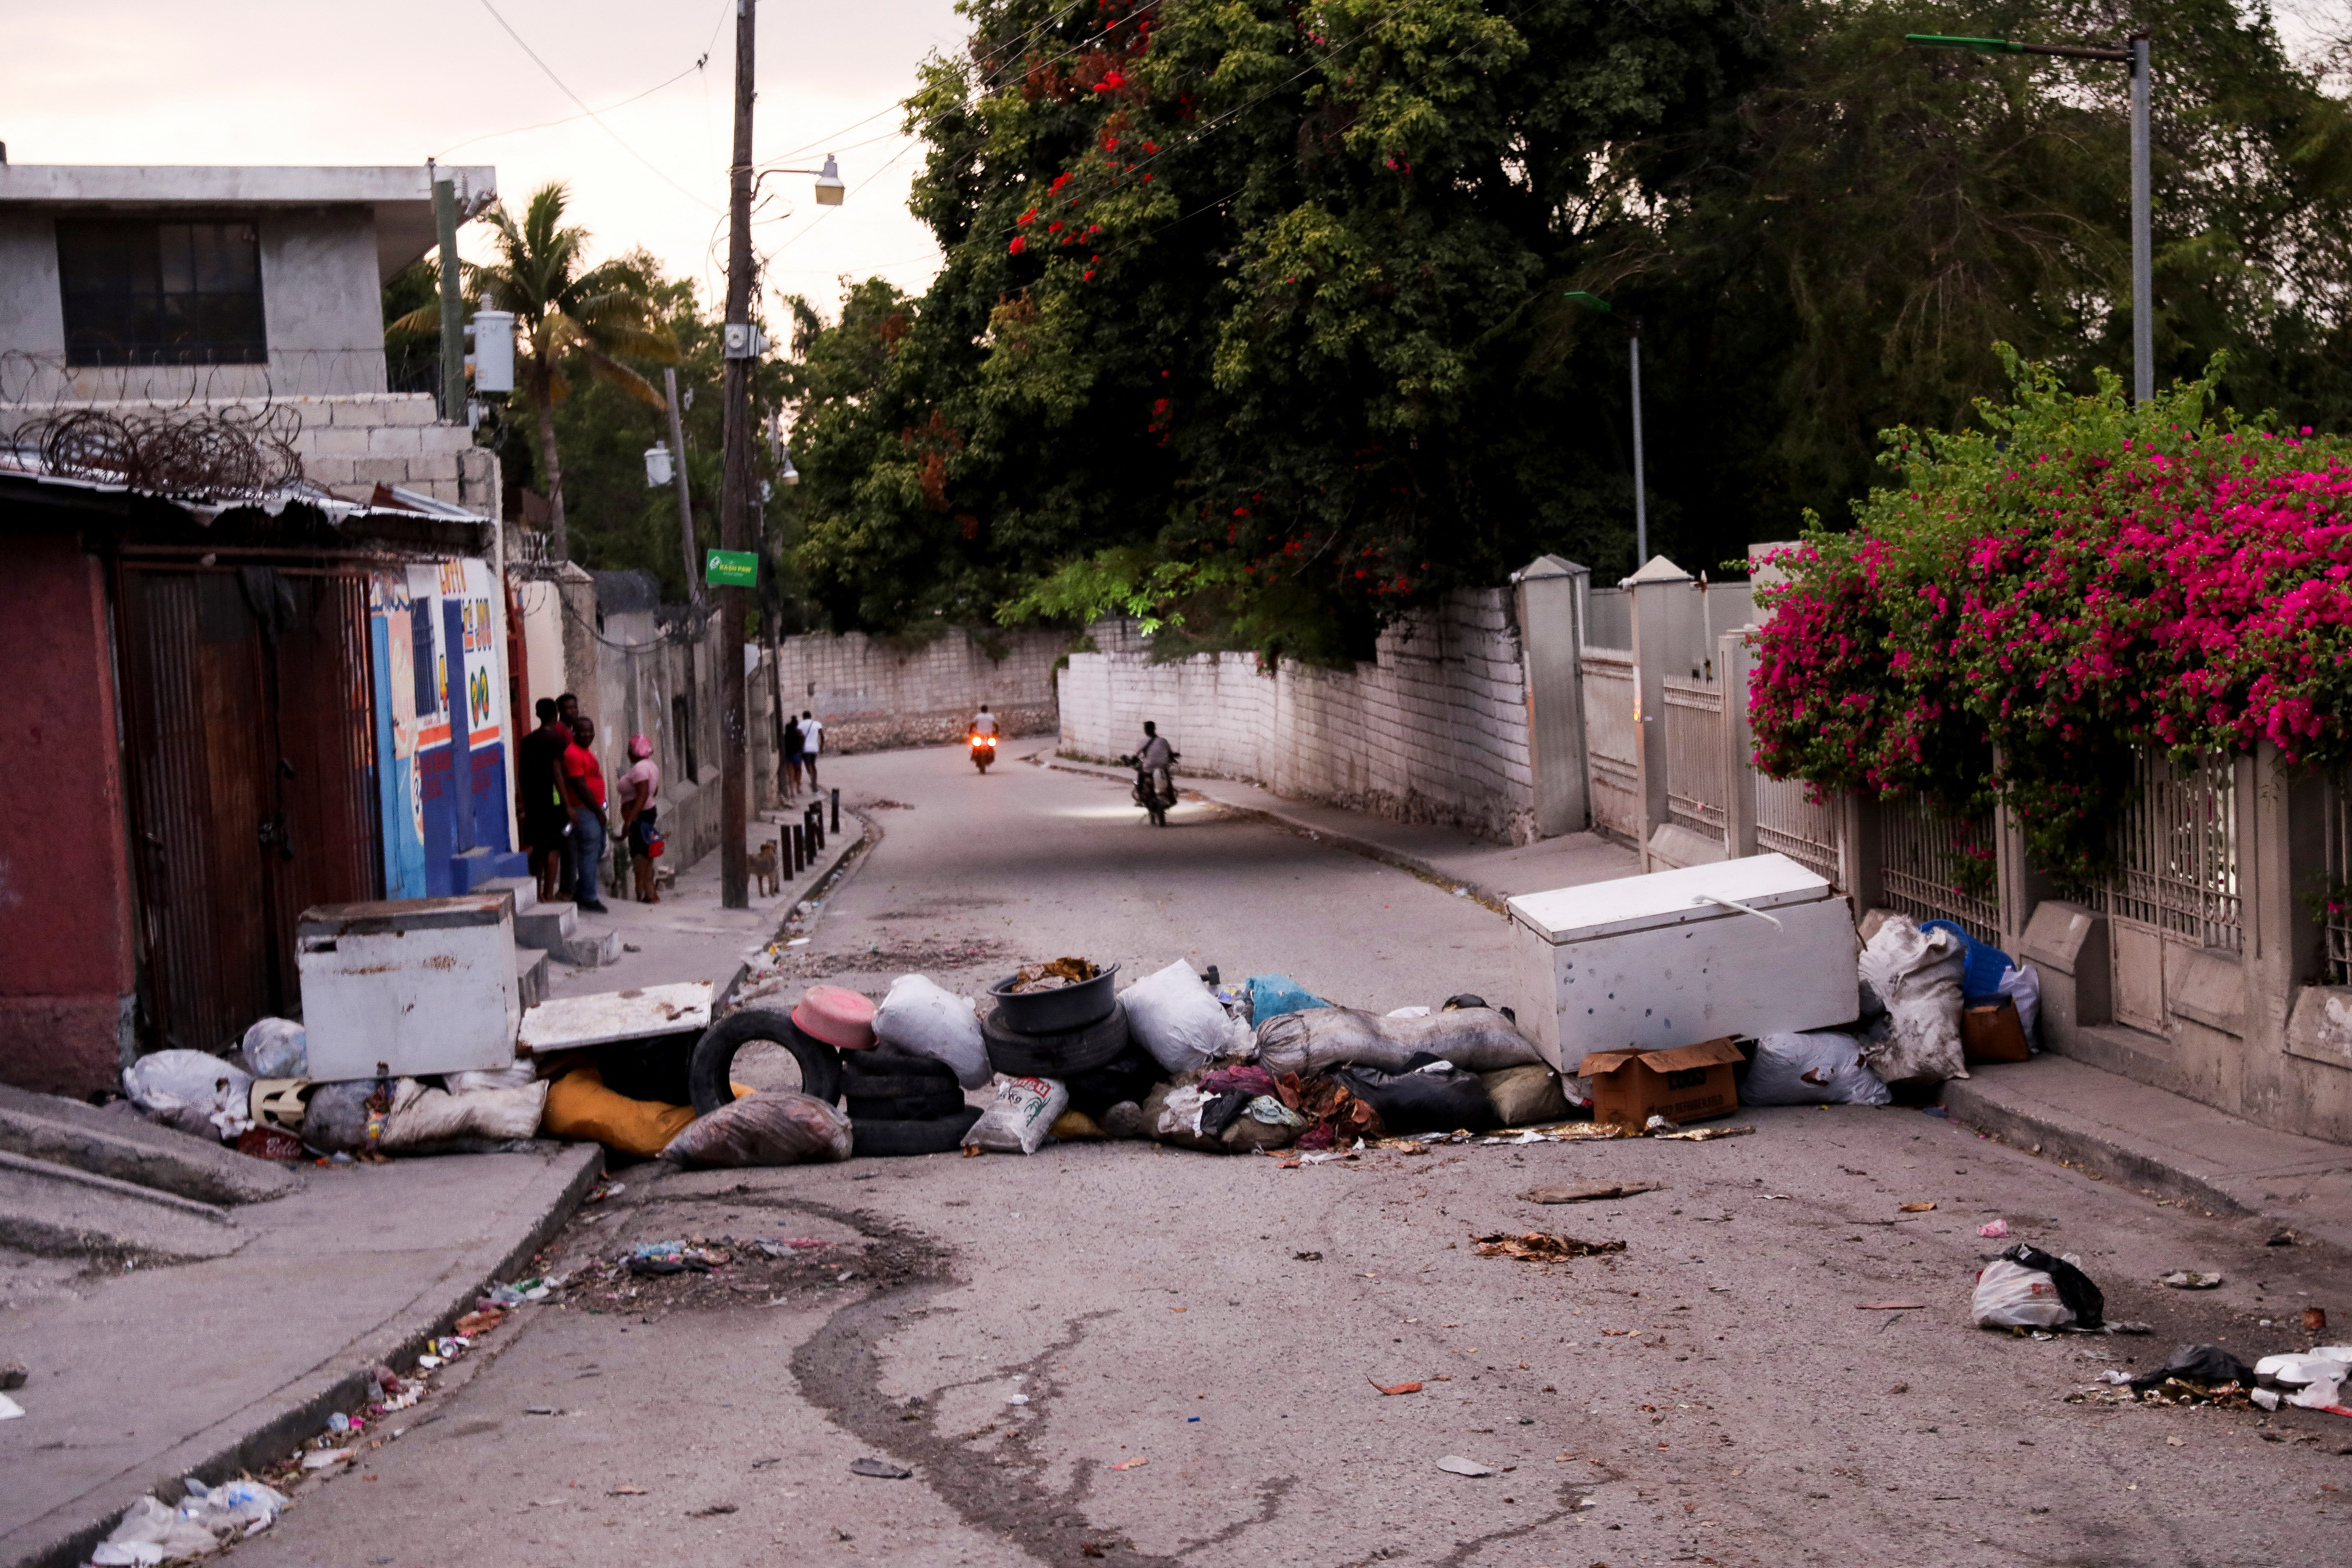 Residents in Port-au-Prince have constructed makeshift barricades made of kitchen appliances and clothes